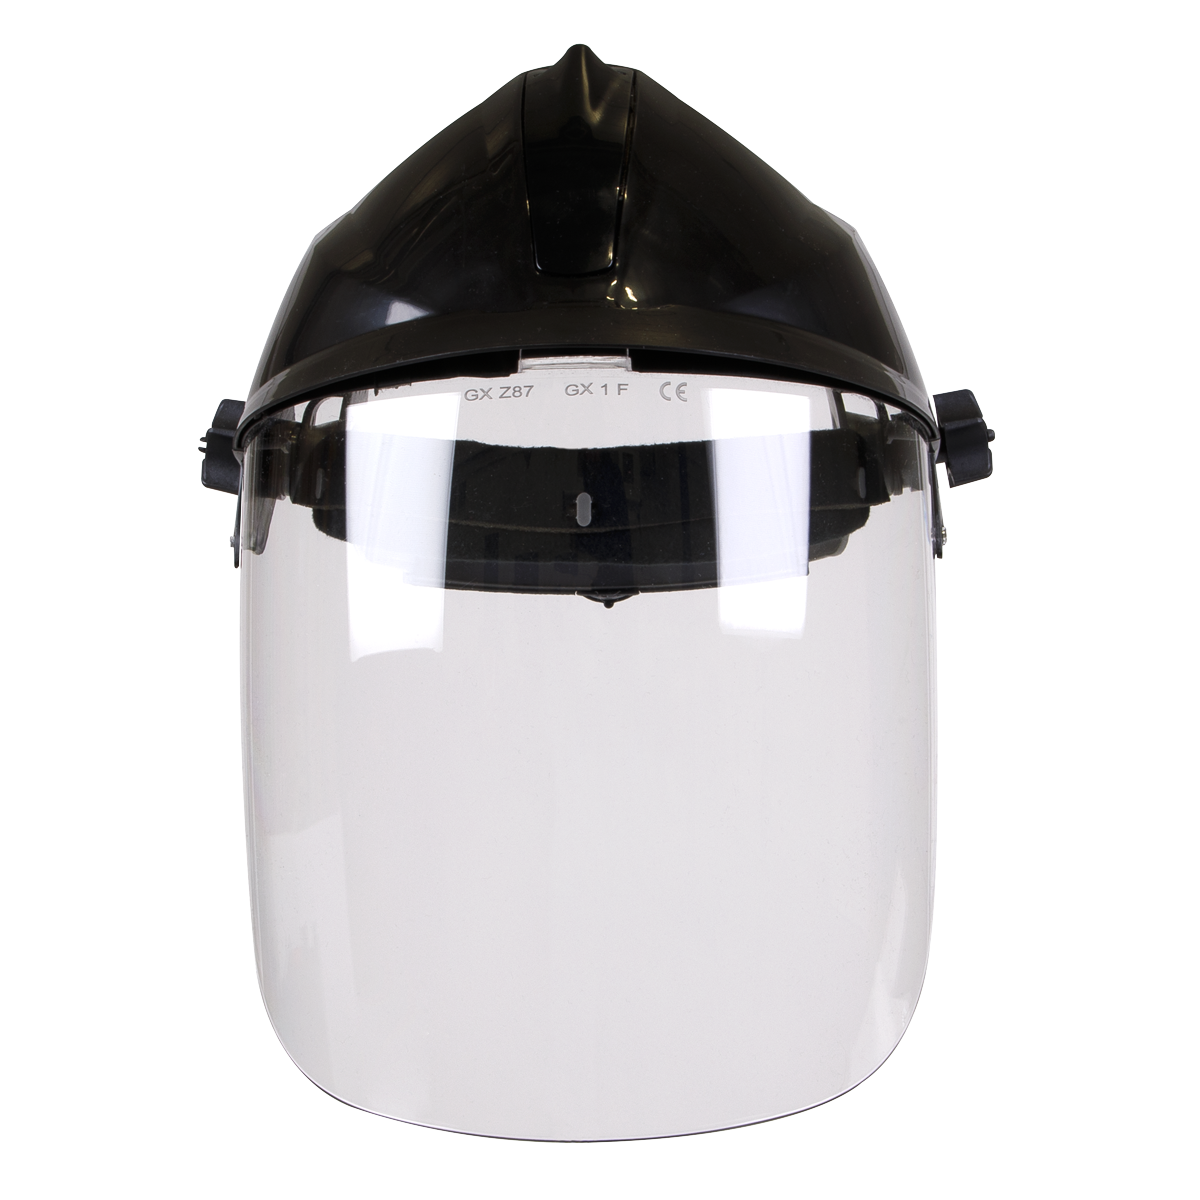 Deluxe Brow Guard with Aspherical Polycarbonate Full Face Shield